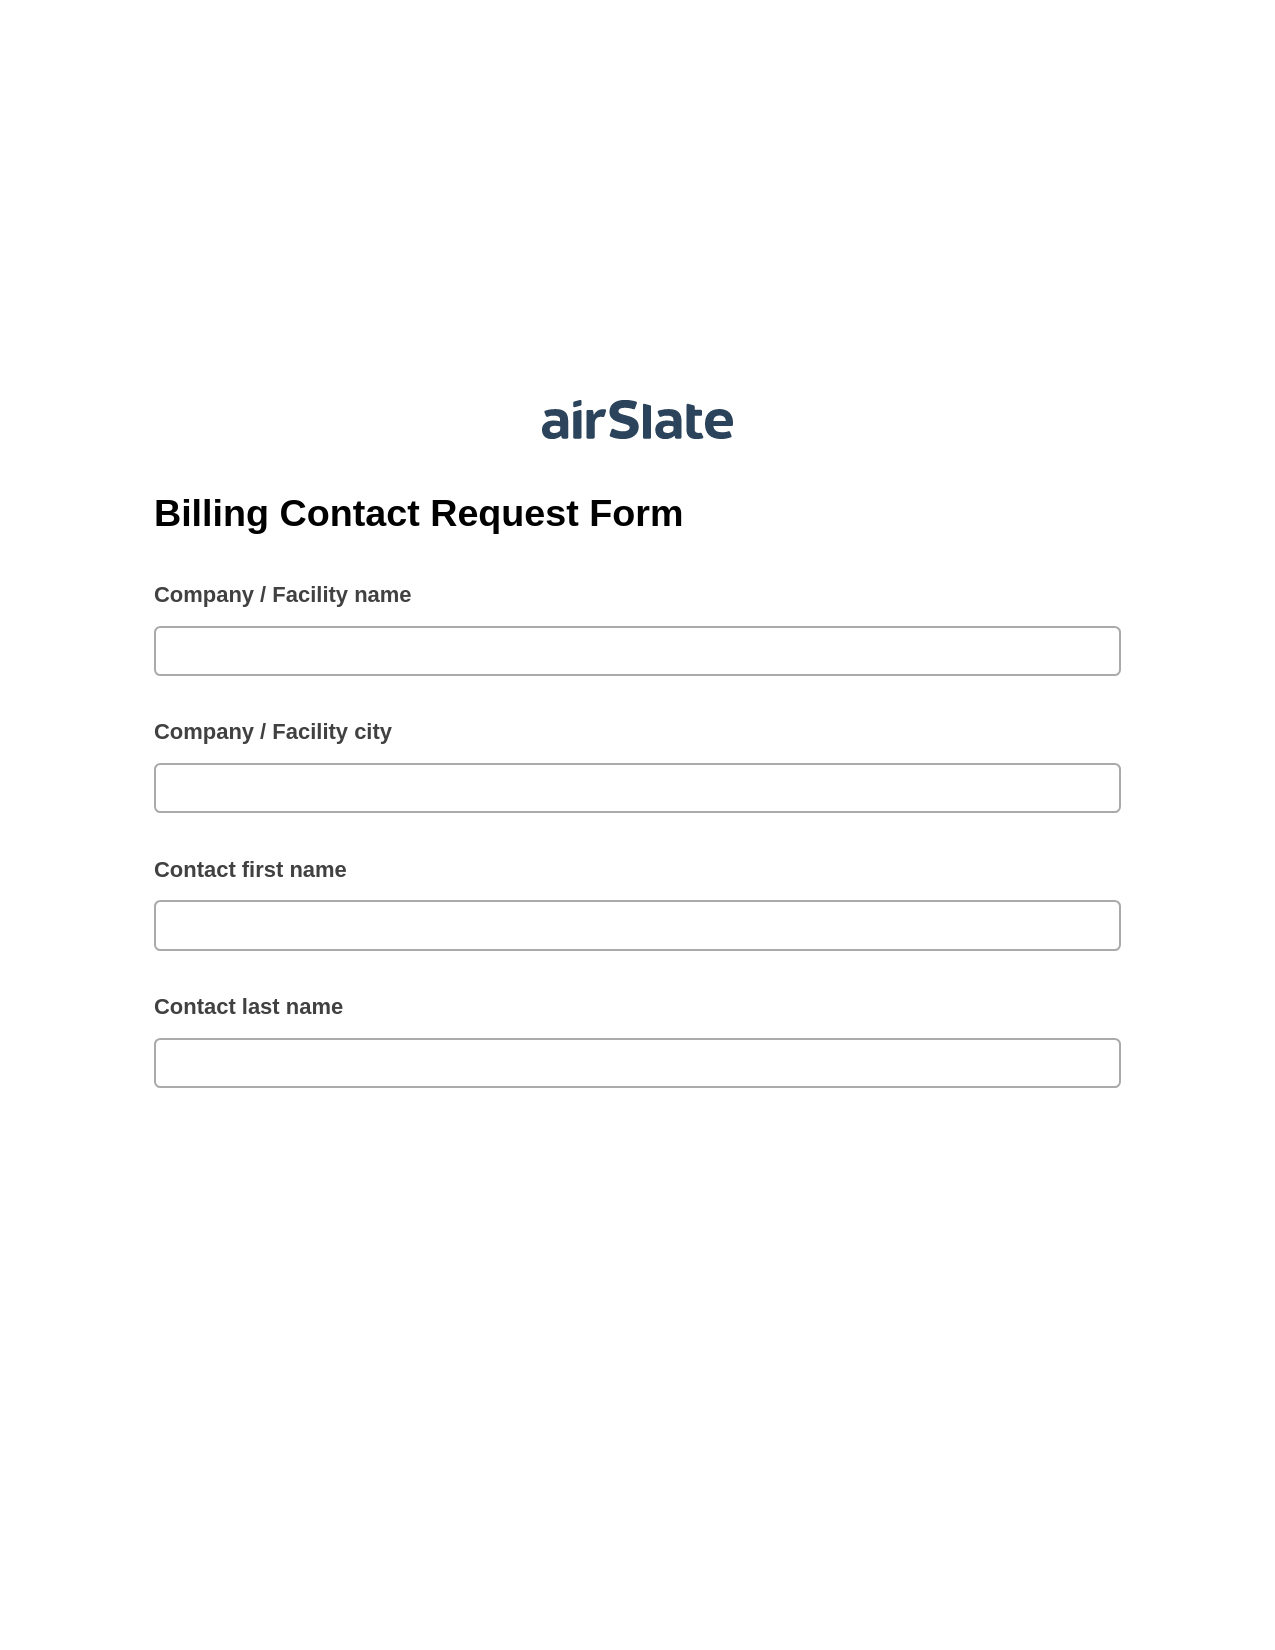 Multirole Billing Contact Request Form Pre-fill Slate from MS Dynamics 365 Records Bot, Create Salesforce Record Bot, Google Drive Bot